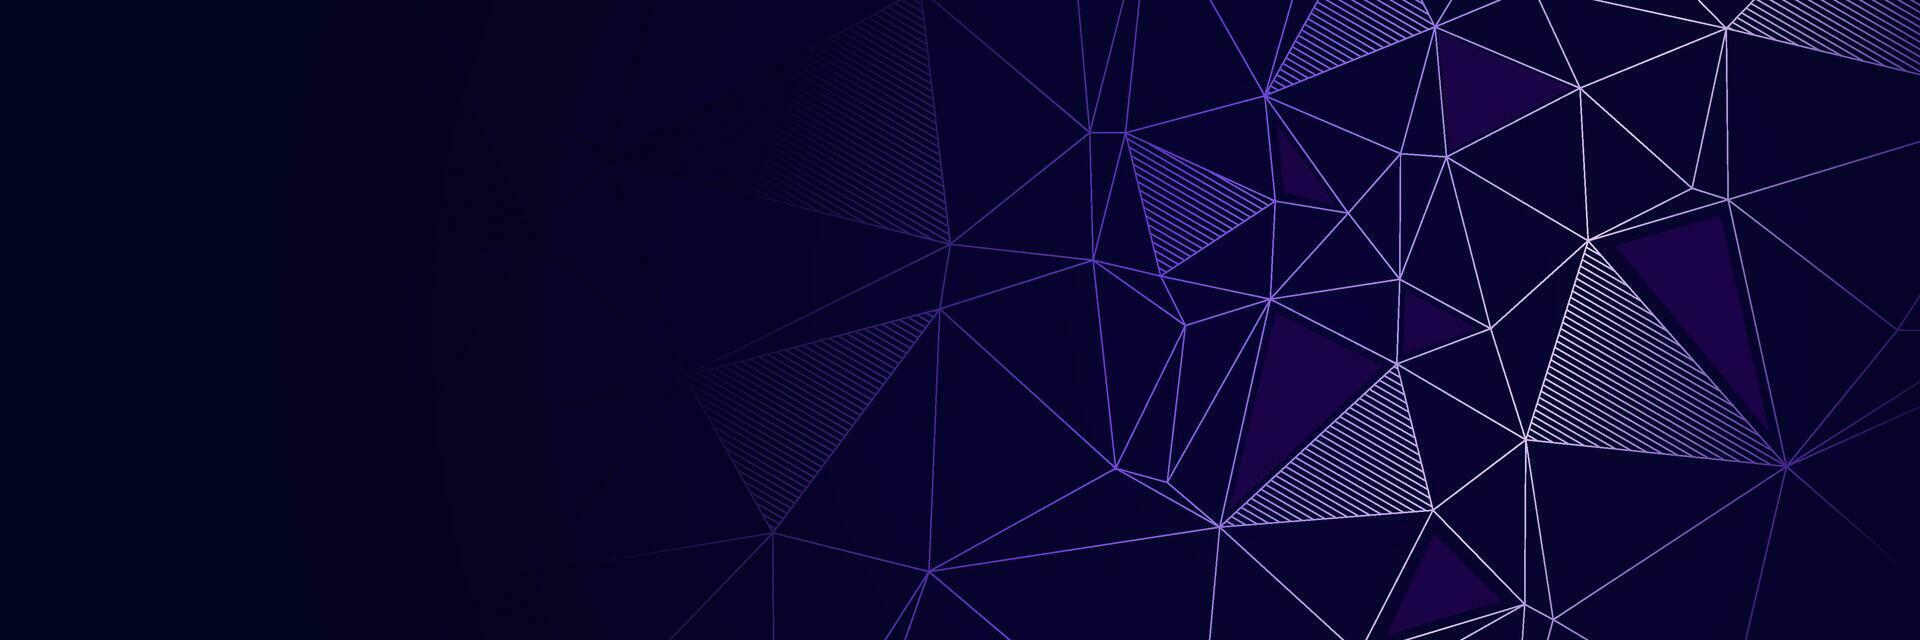 abstract dark purple modern elegant background with lines vector